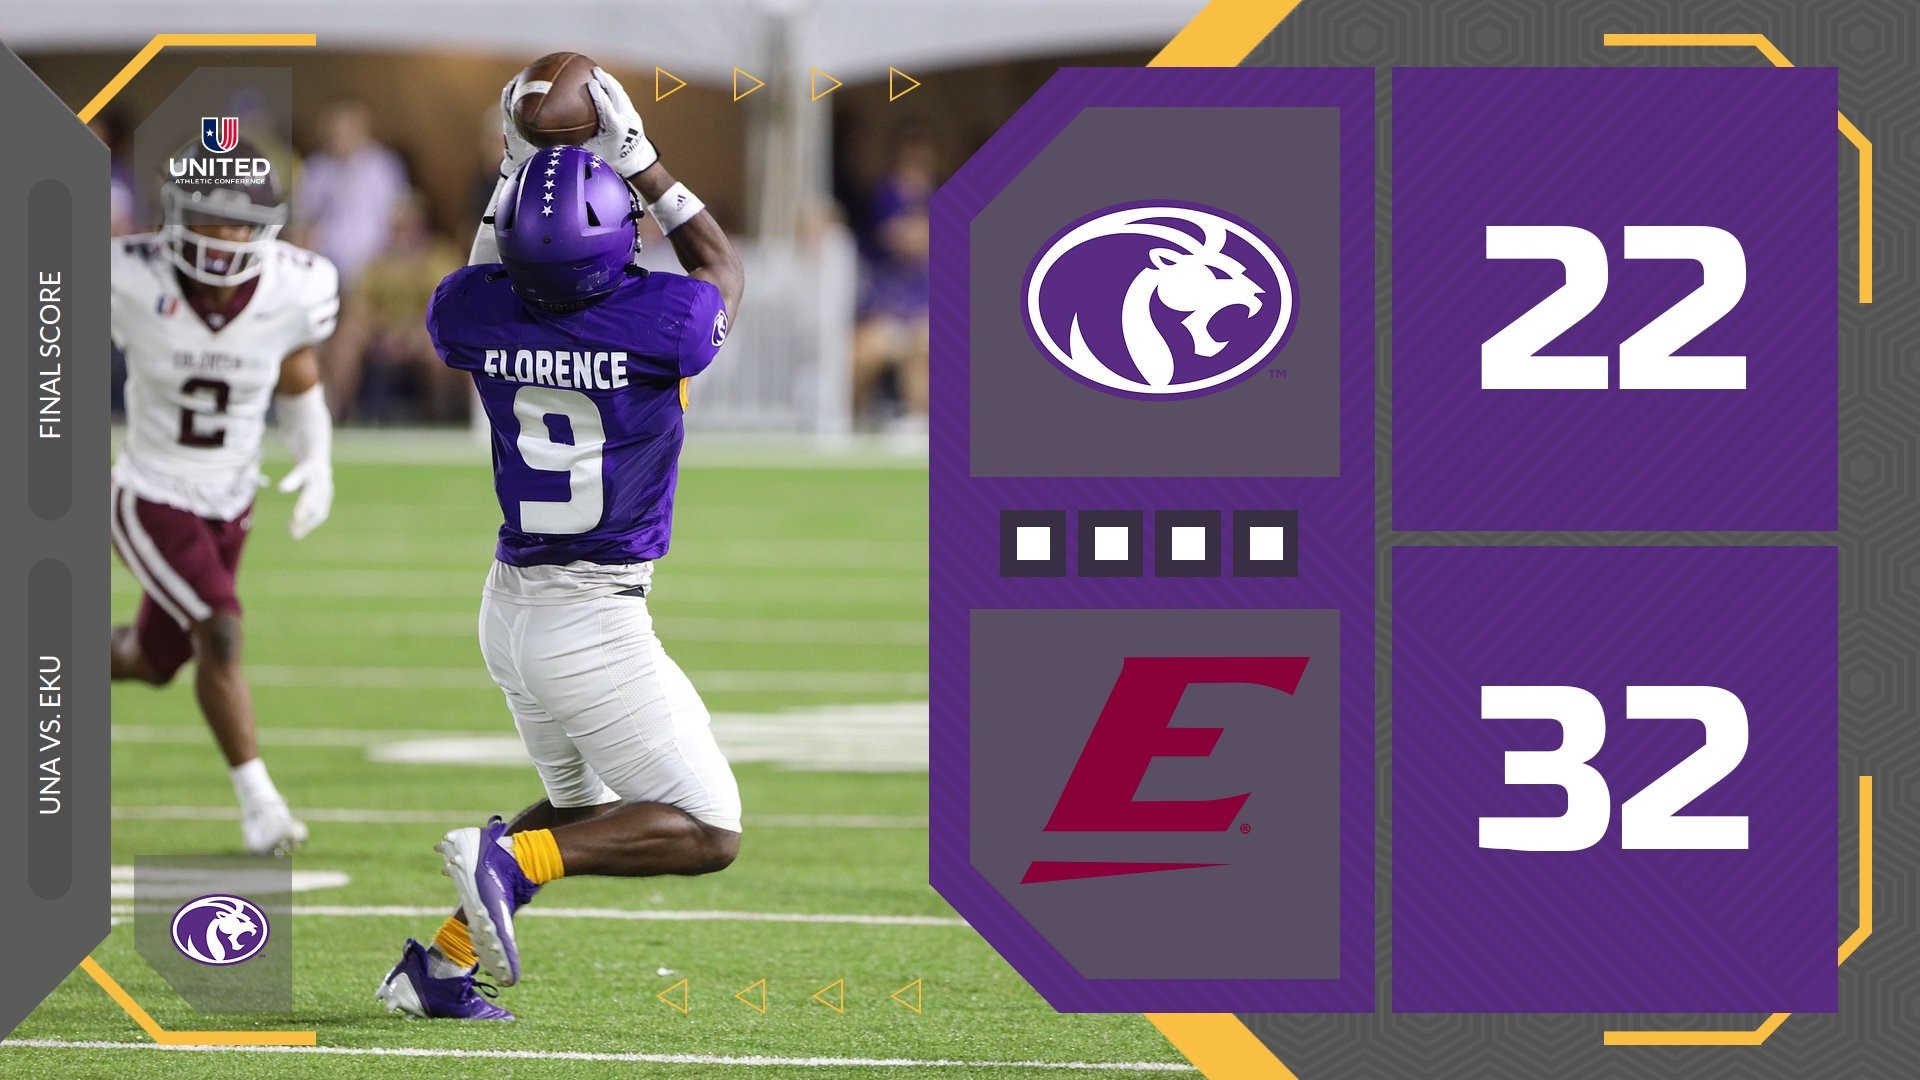 Despite 348 passing yards from Noah Walters, the UNA Lions dropped their second straight game at home, this time to Eastern Kentucky